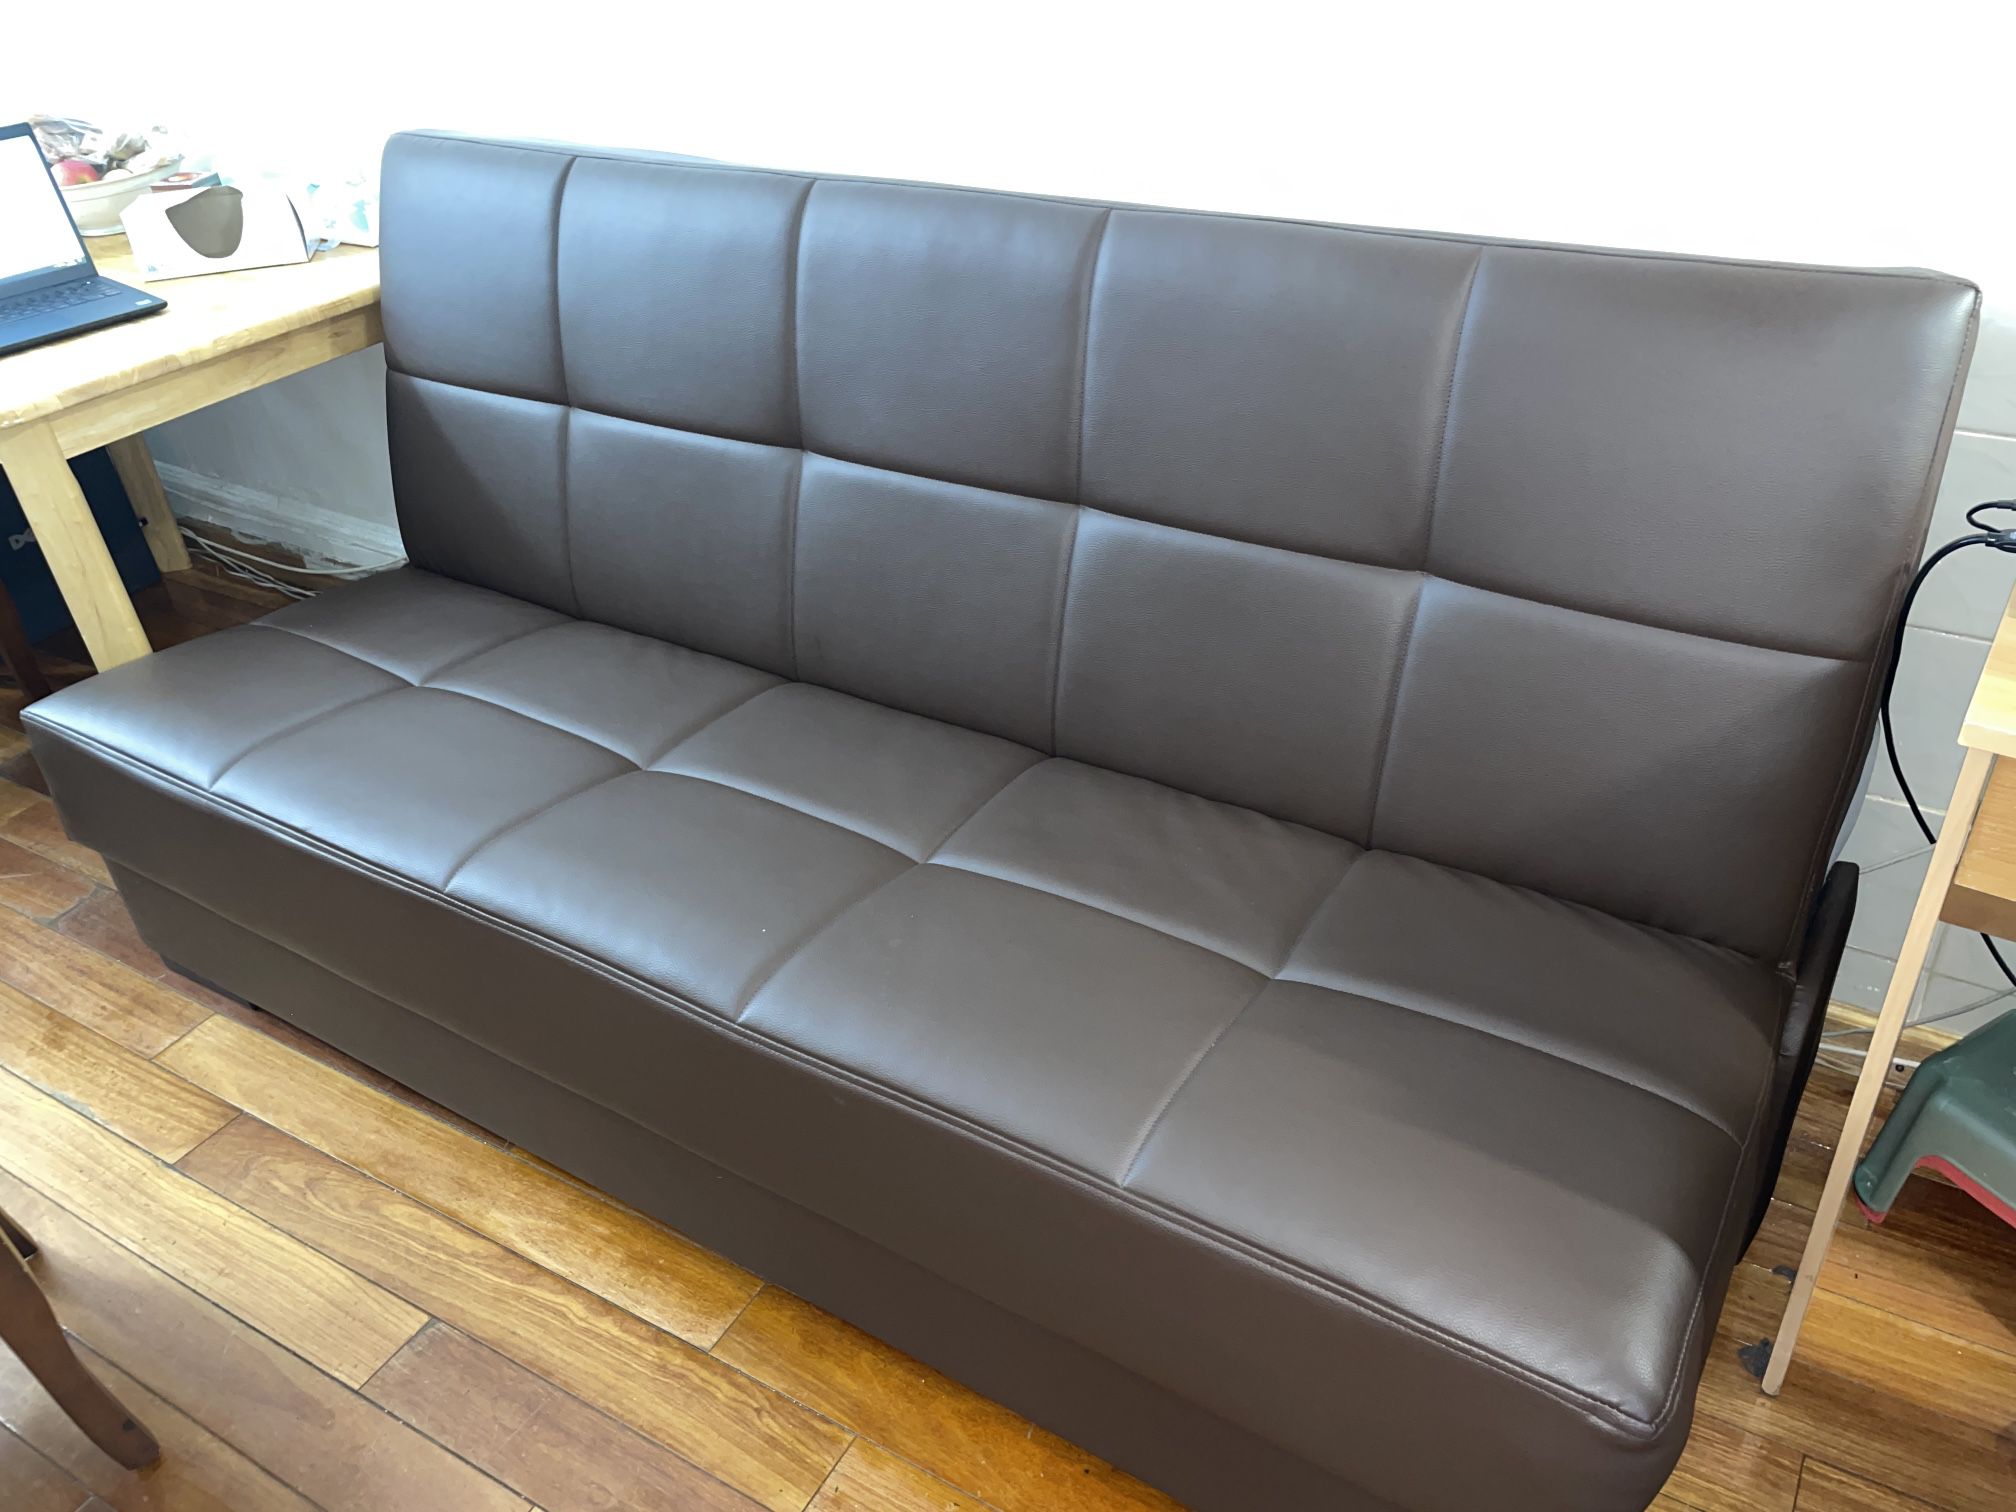 Almost Brand New Couch - Can Be Used As Bed And Storage